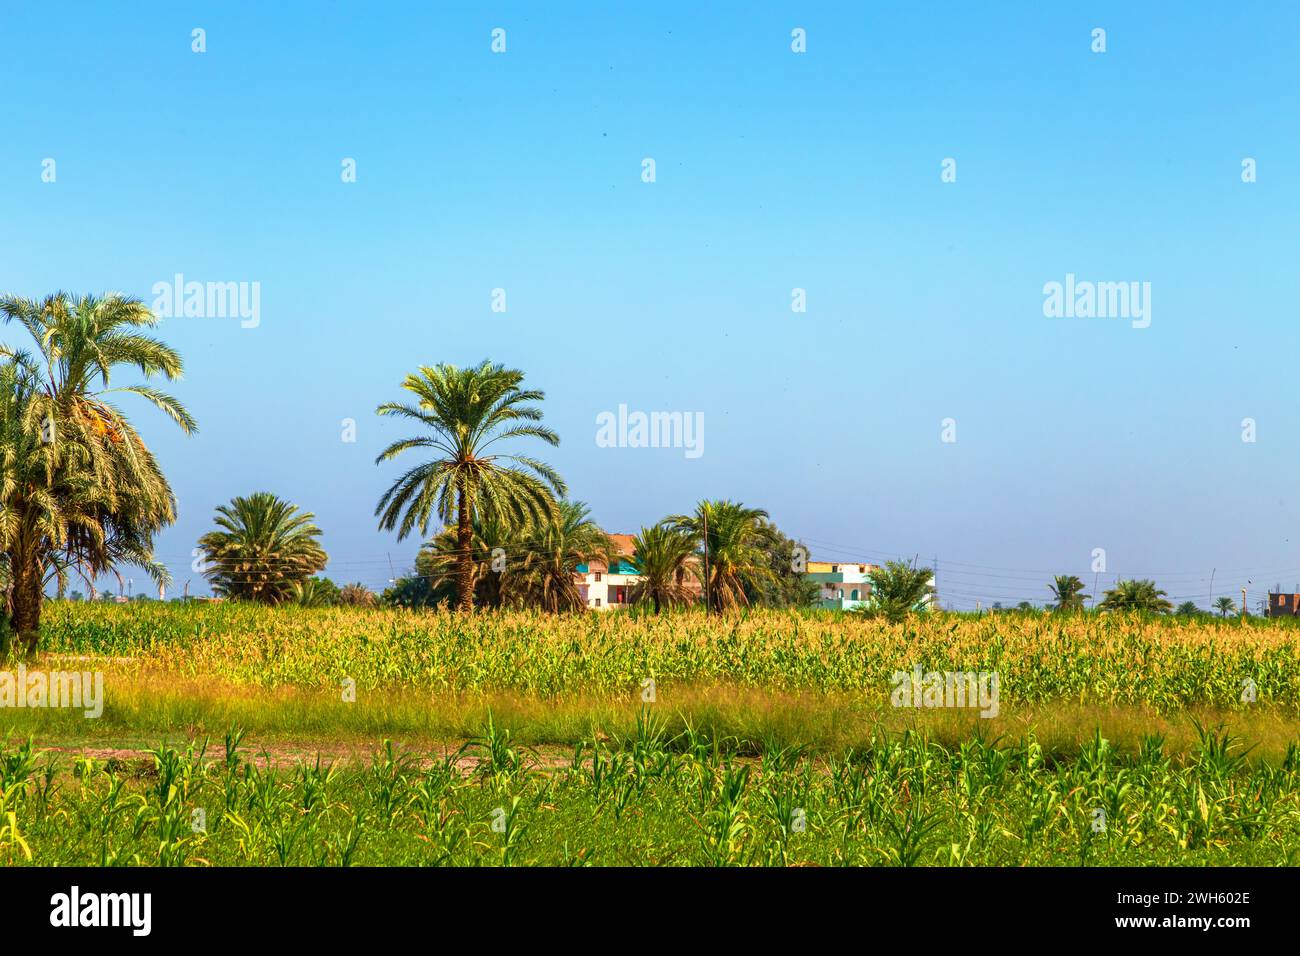 Cultivated fields on the Nile River. Landscape with palm trees and corn. Stock Photo